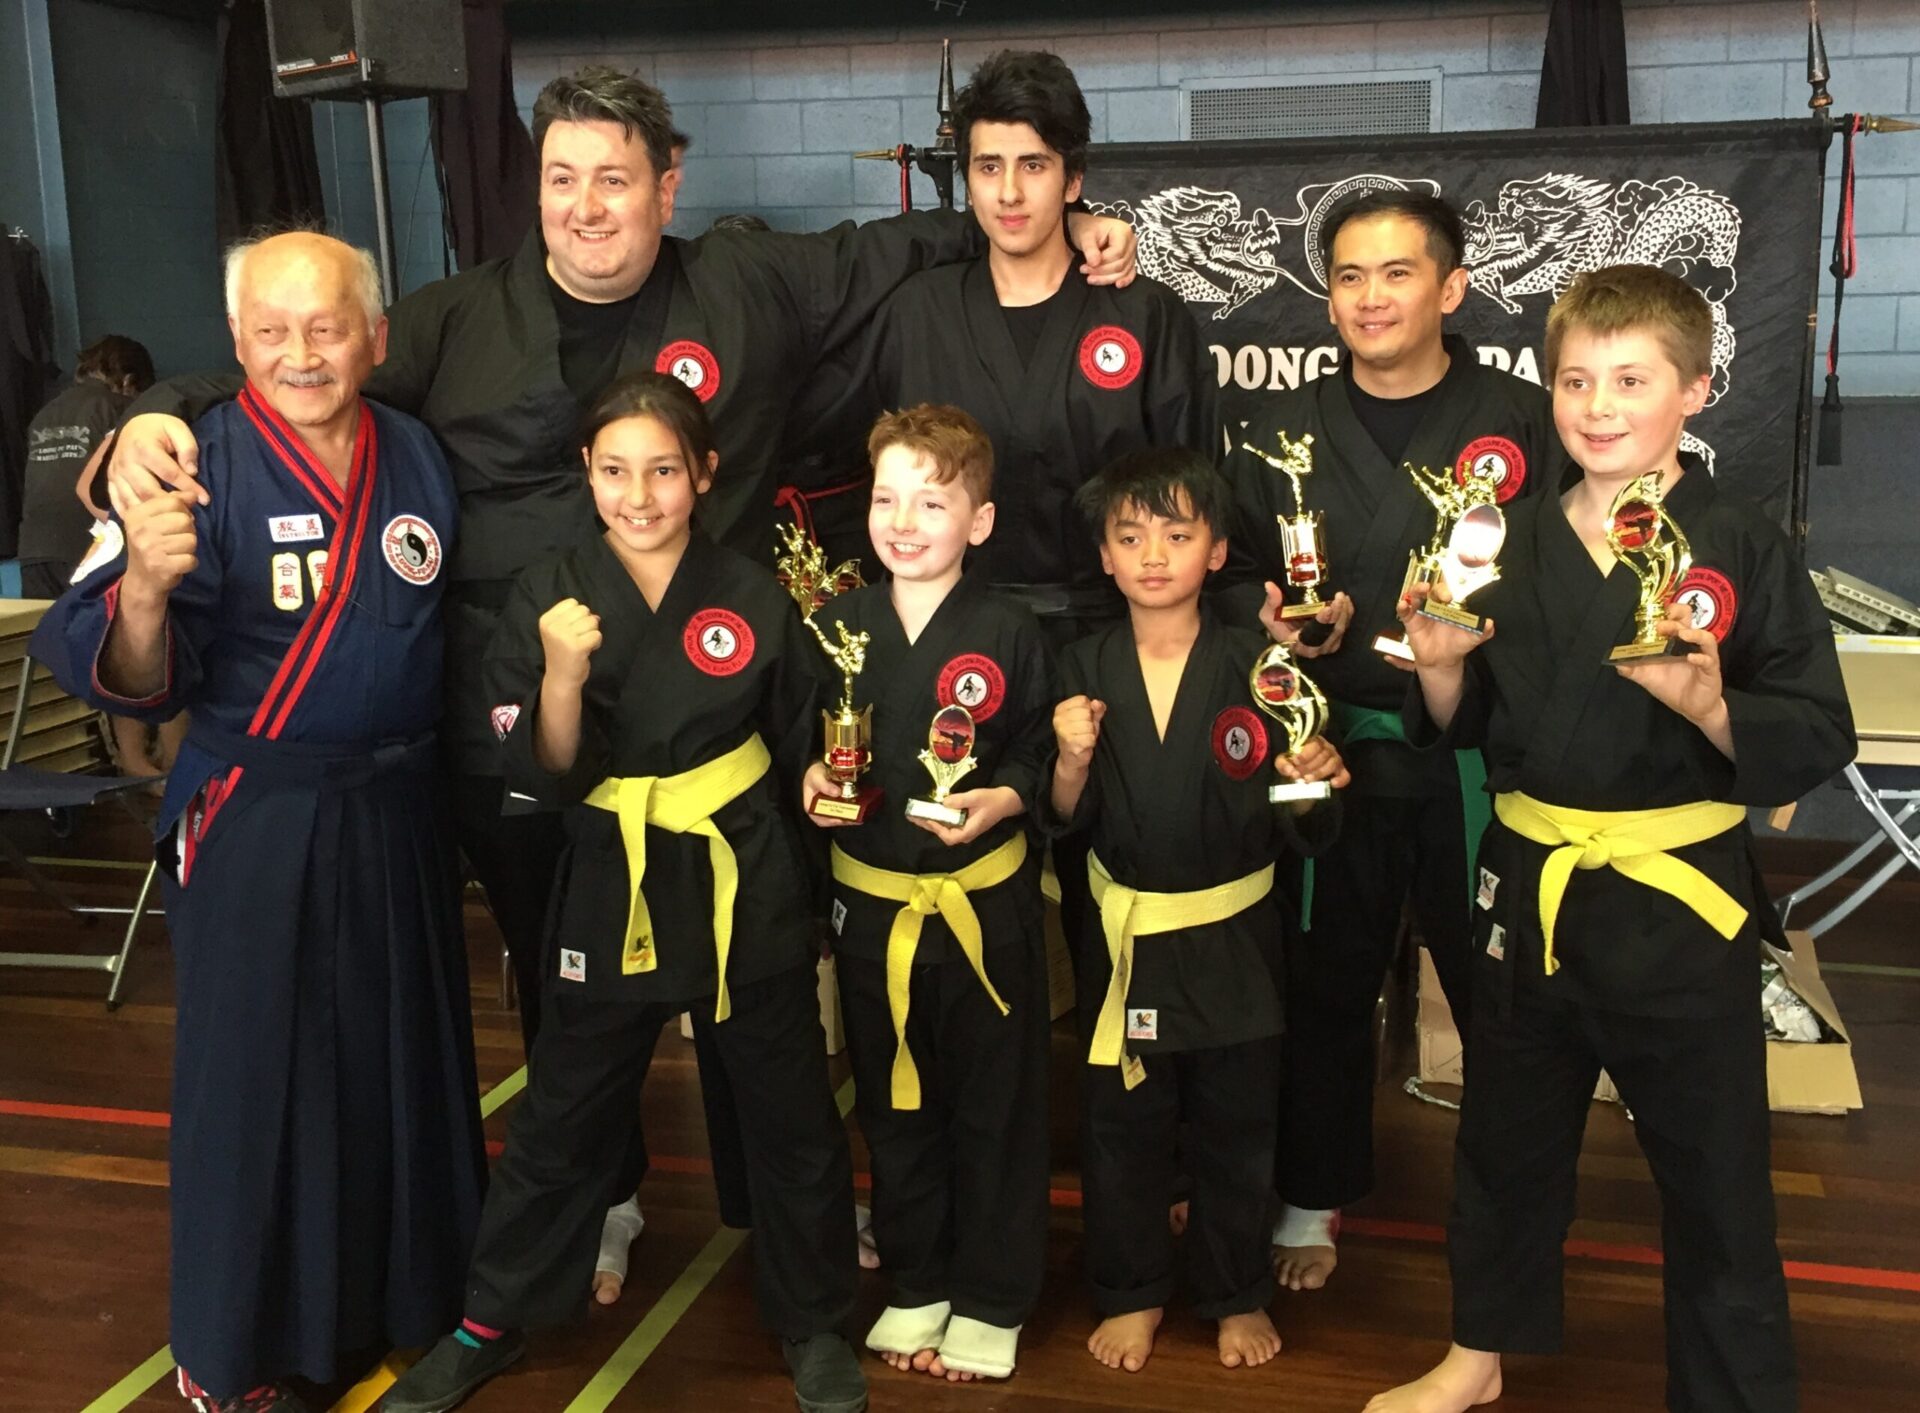 Sifu Maurice and his students at Terry Lim's Tournament of Martial Arts in Melbourne